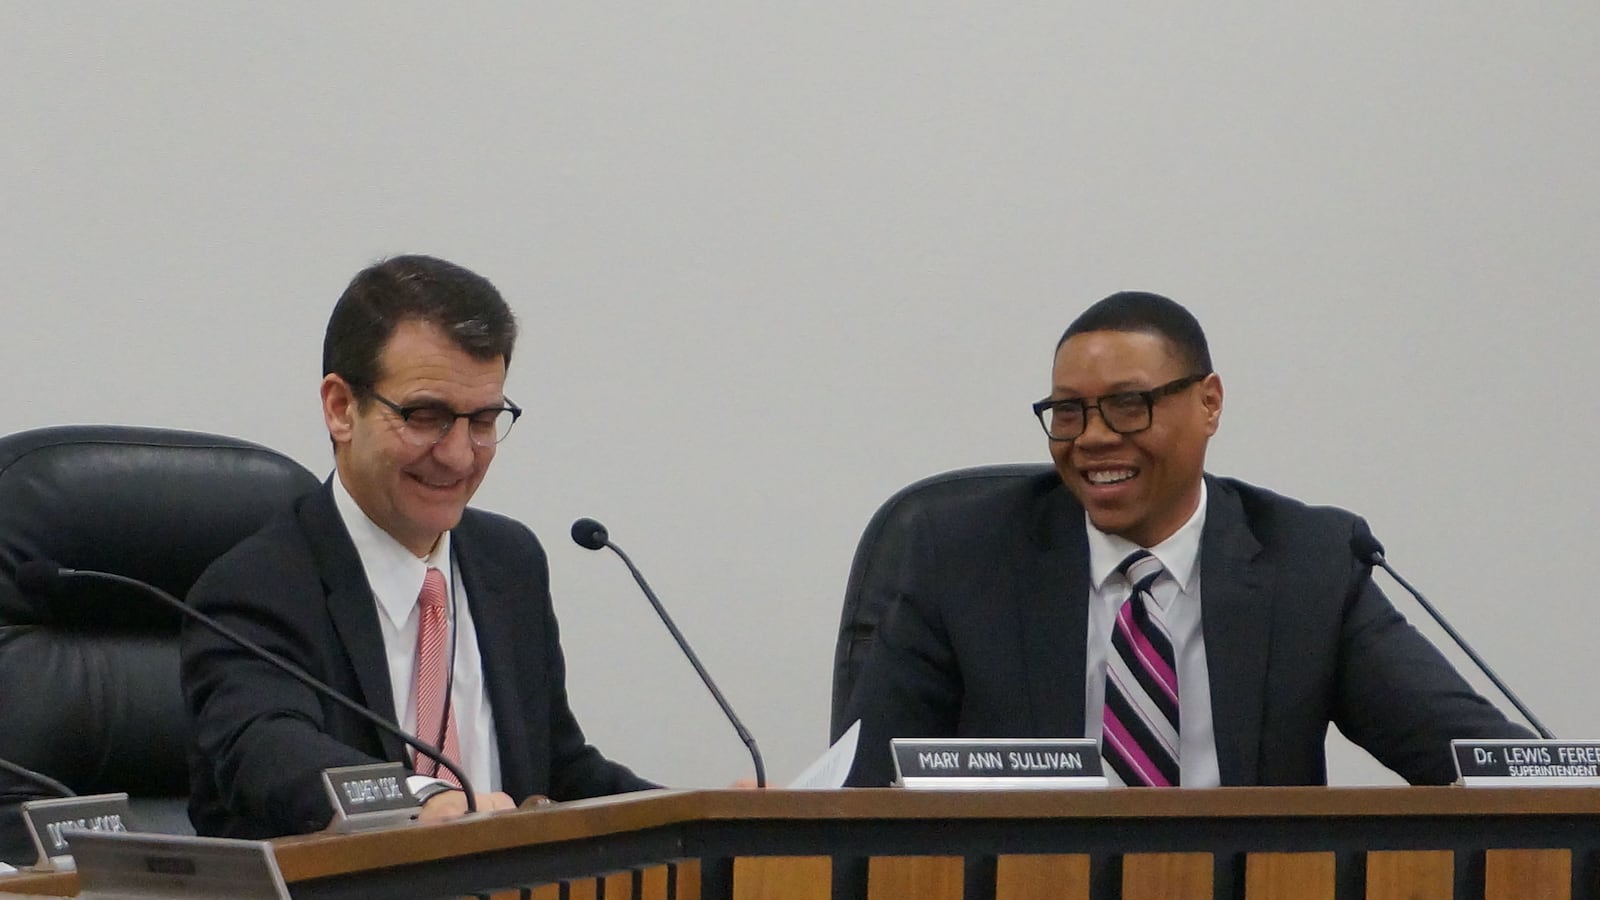 Michael O'Connor was elected president of the Indianapolis Public Schools board.